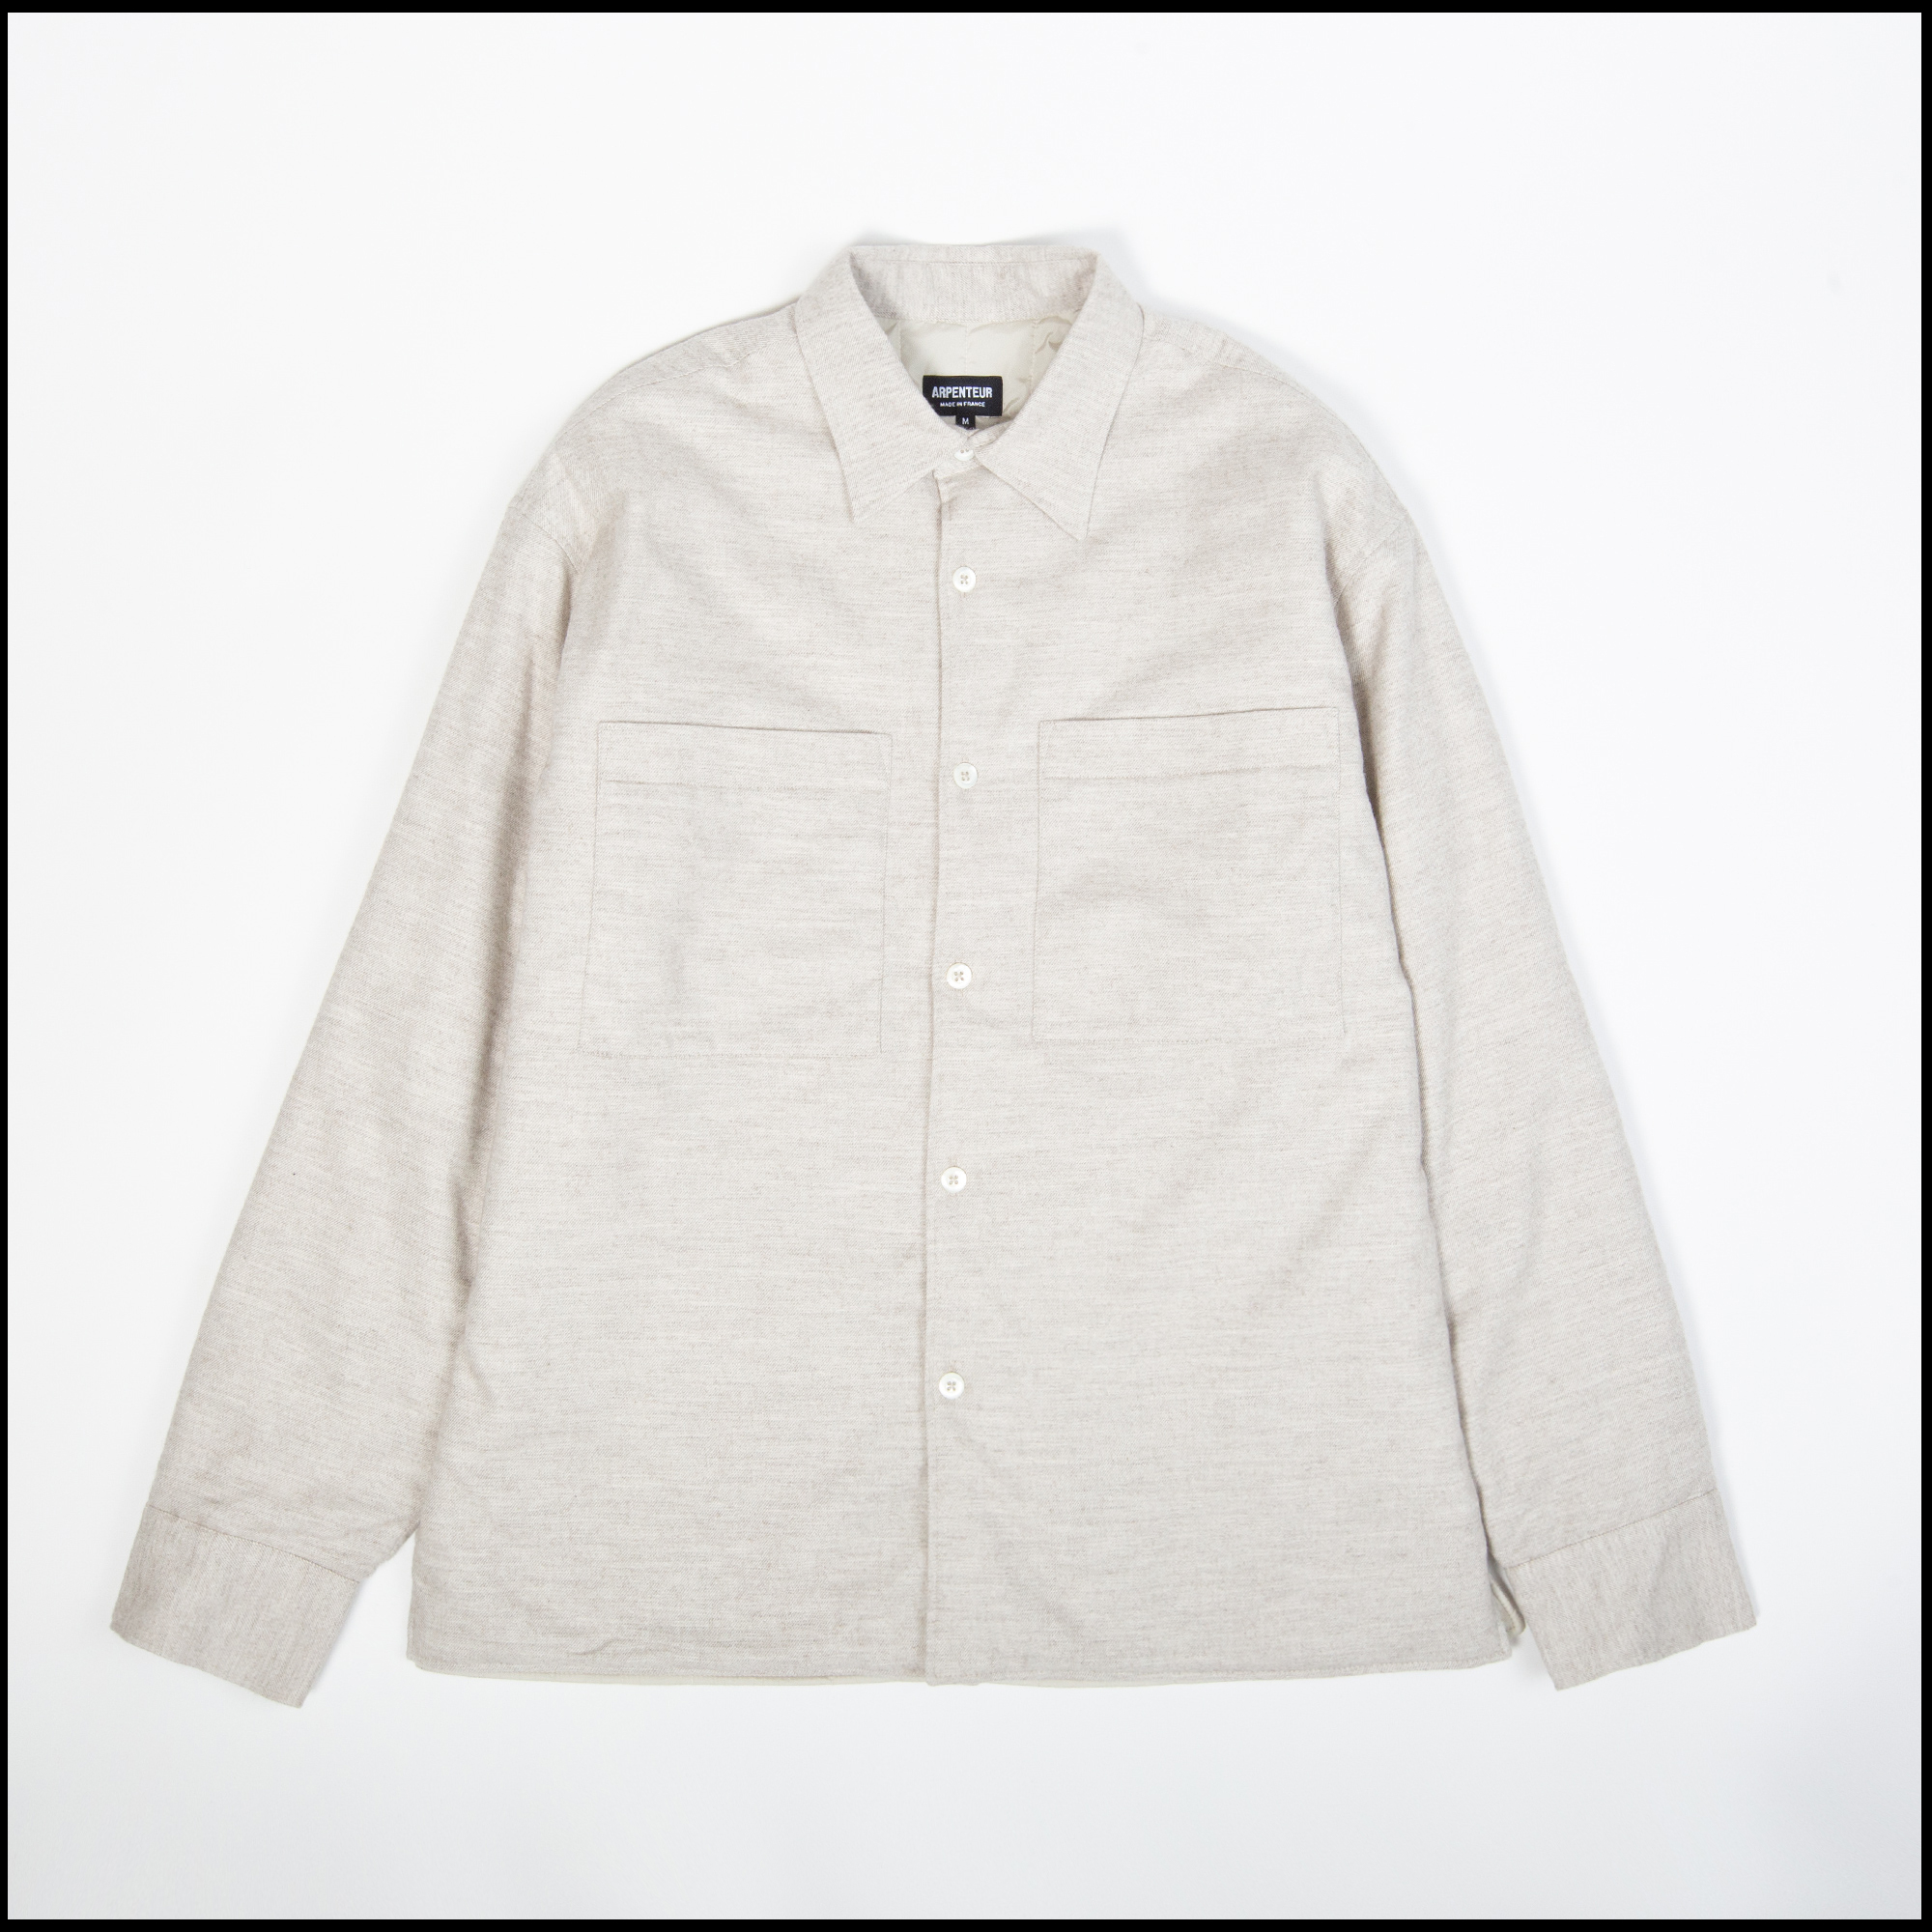 TWIN shirt in Natural color by Arpenteur